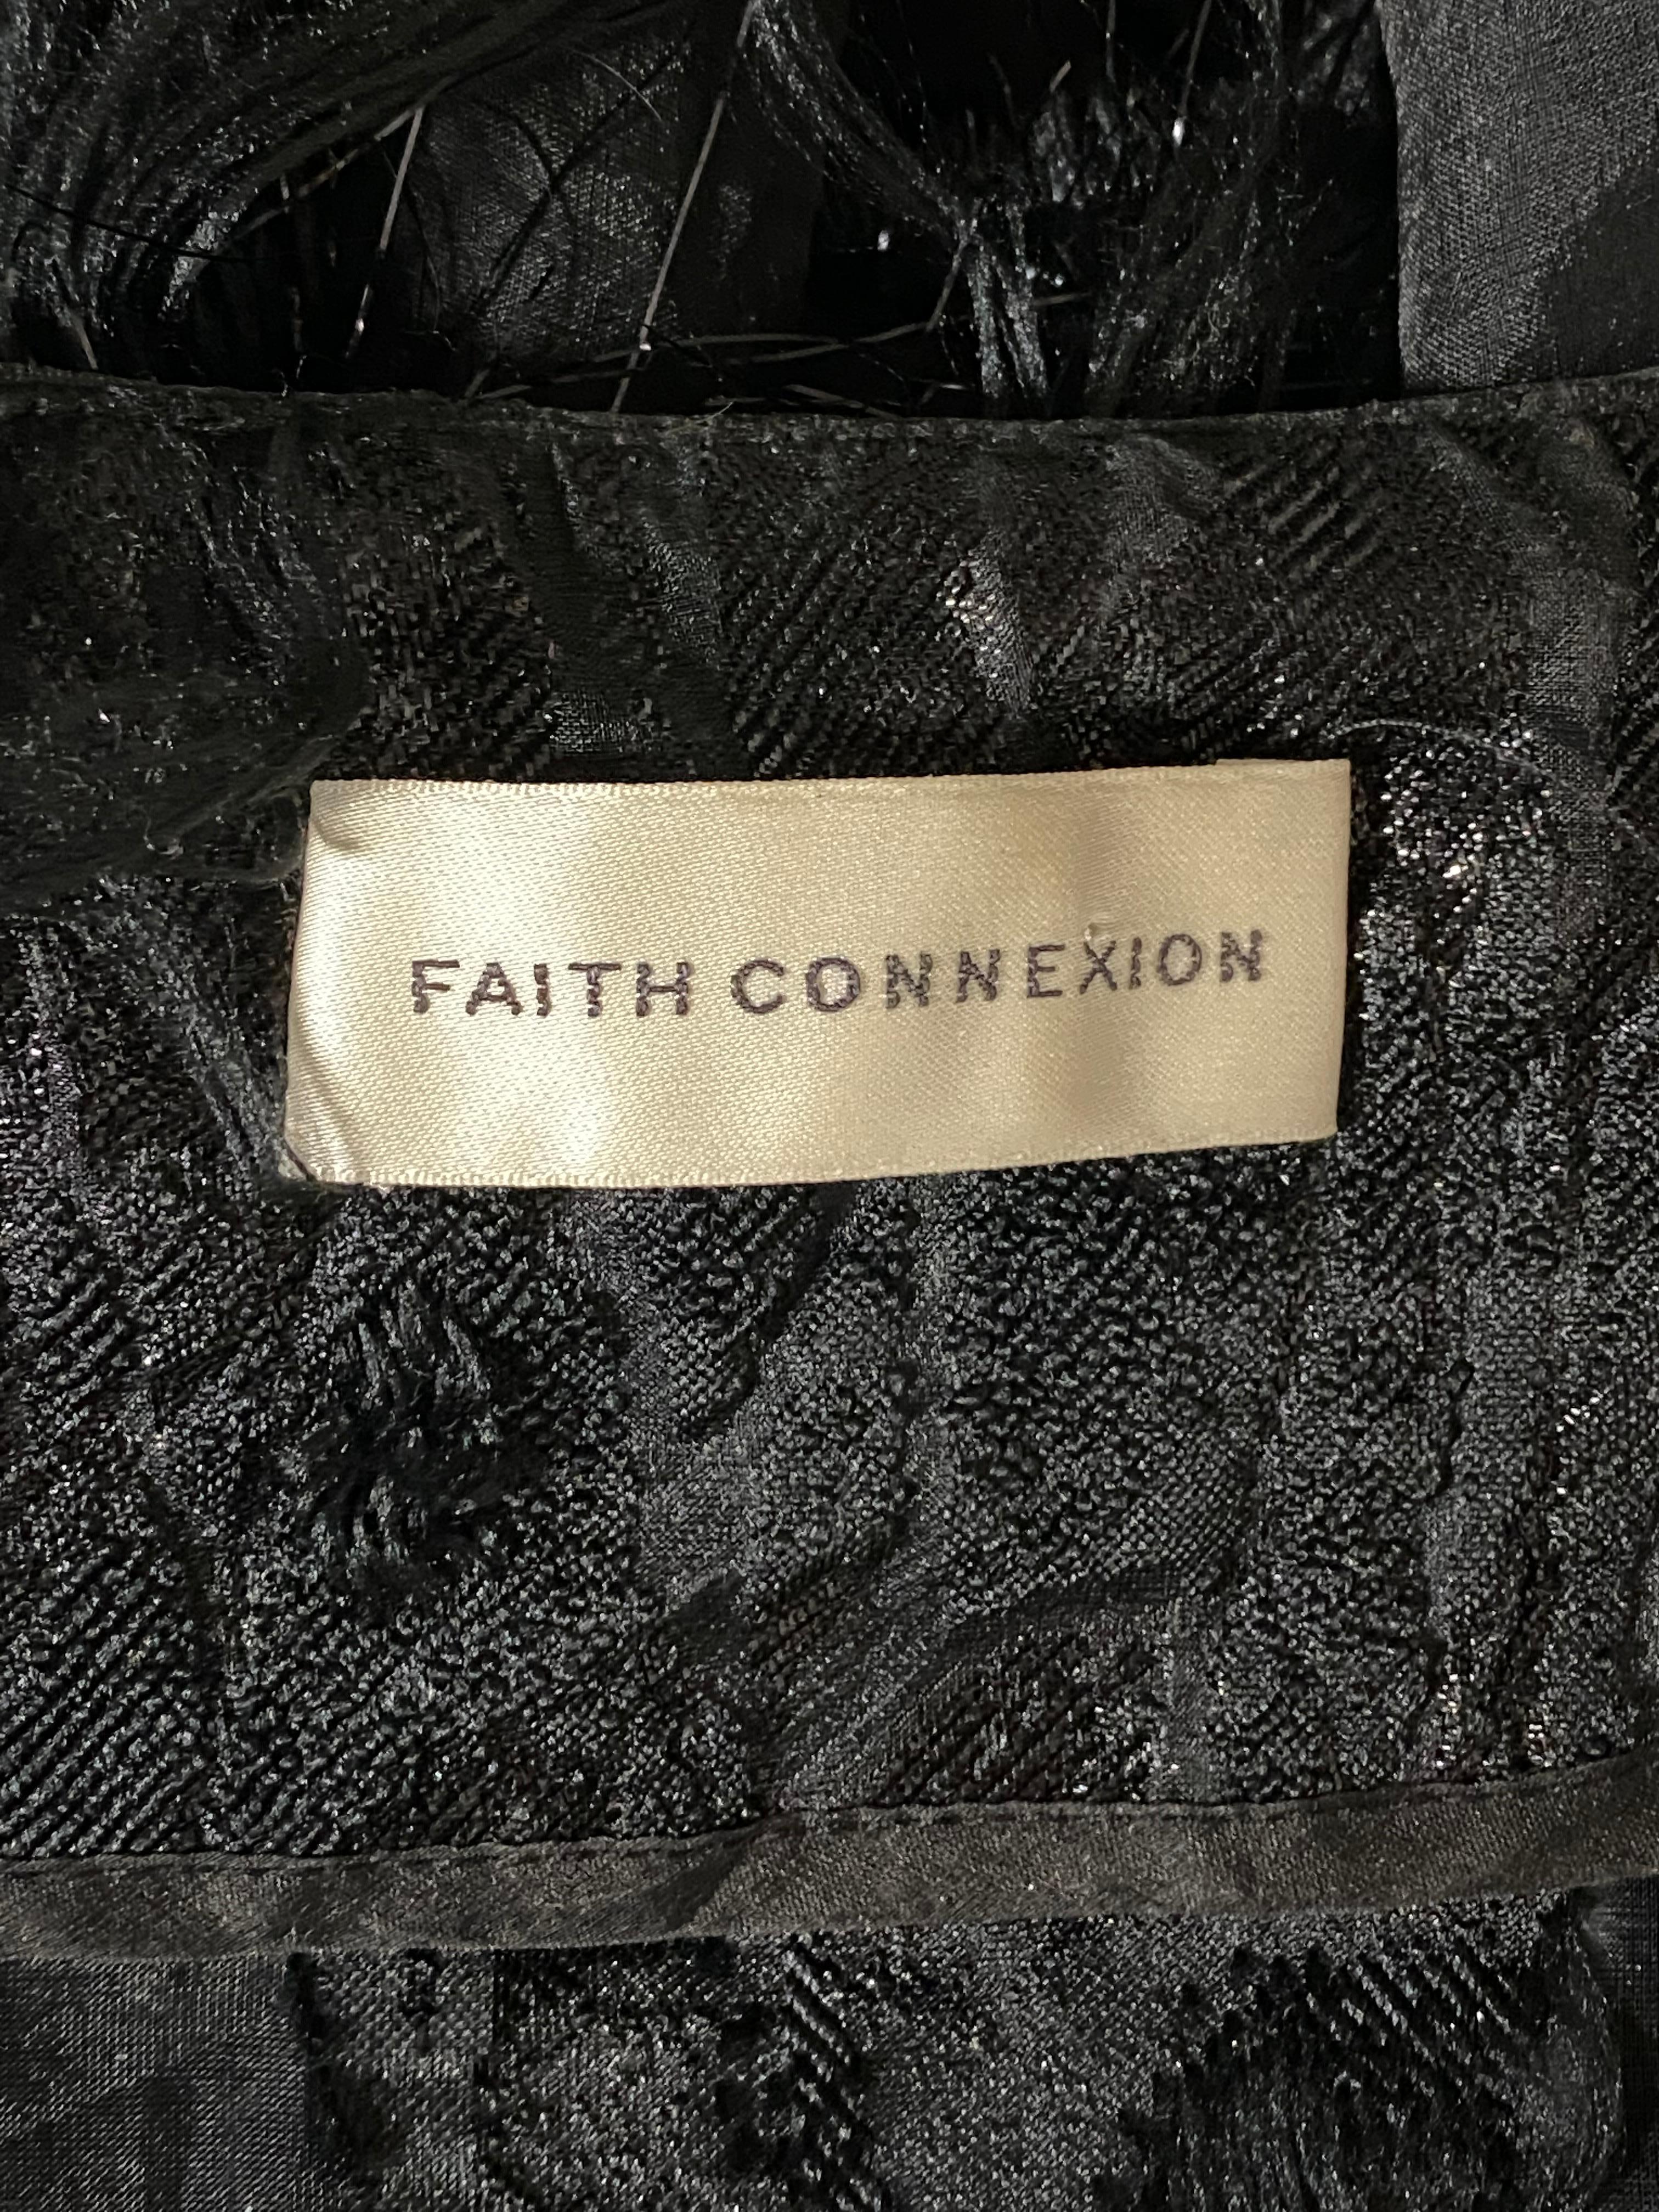 Faith Connexion Black Mesh Lace and Feather Evening Cover Up Coat Jacket 4